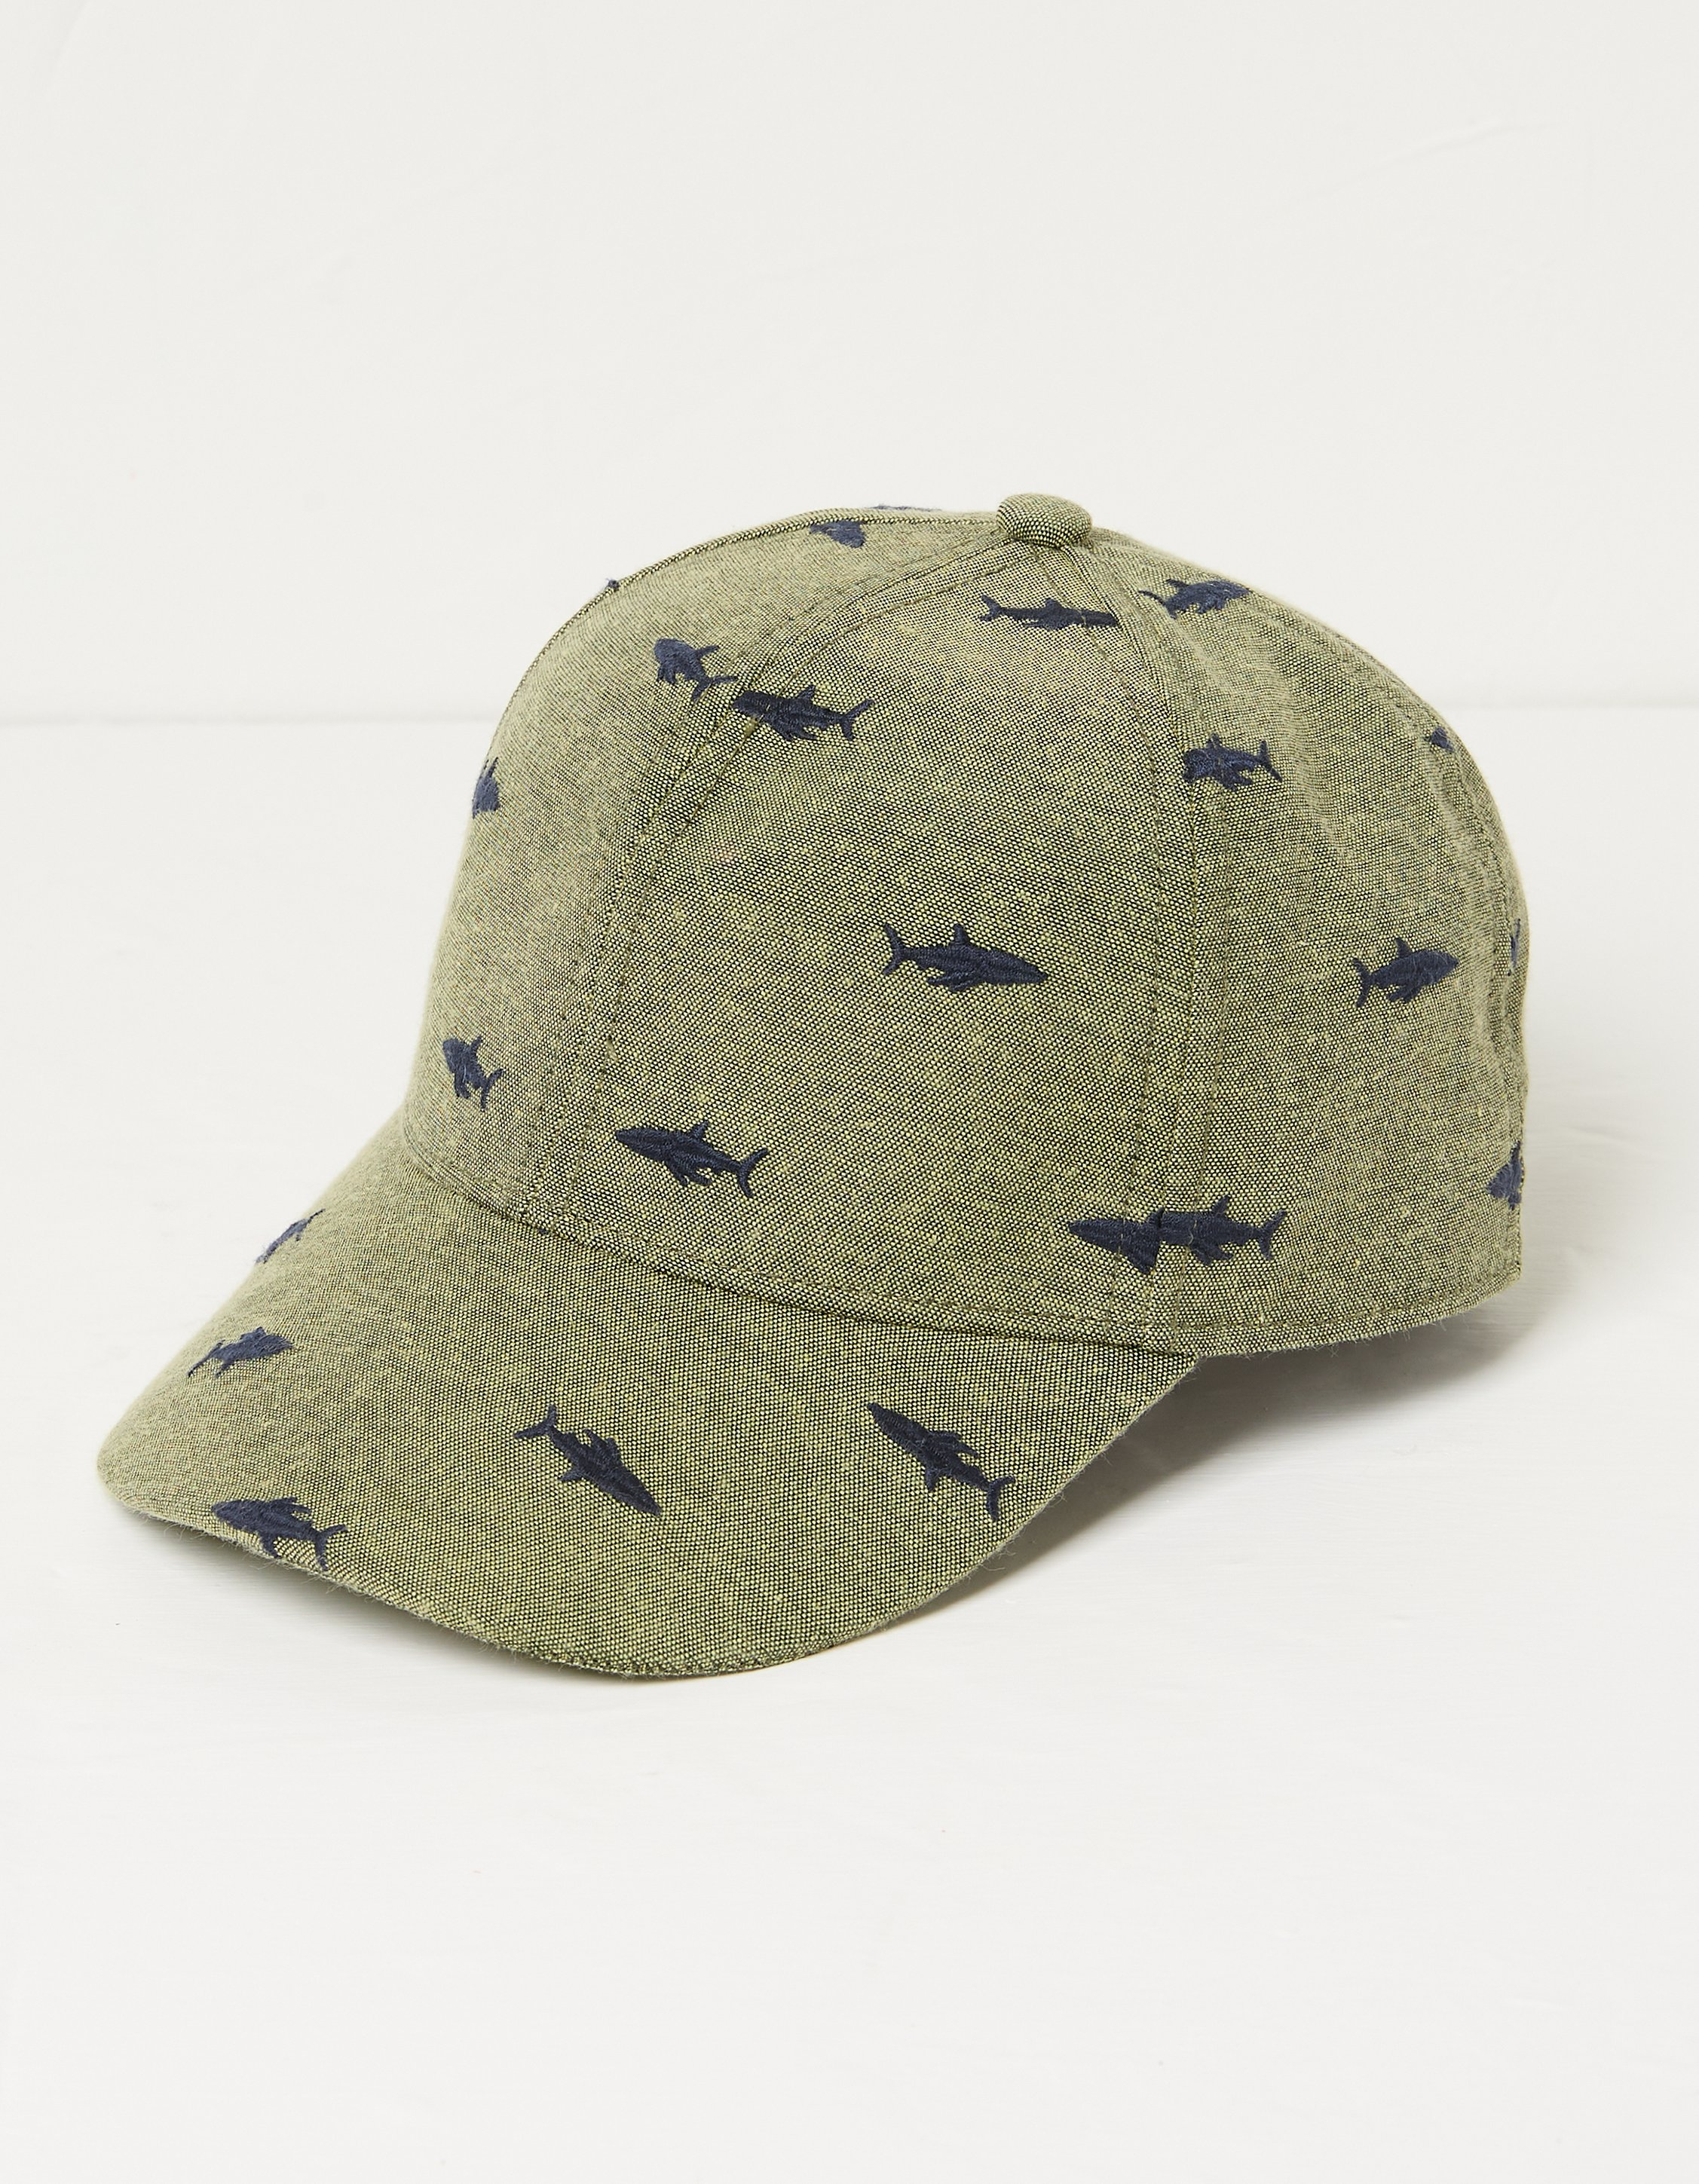 Kid’s Shark Embroidered Cap